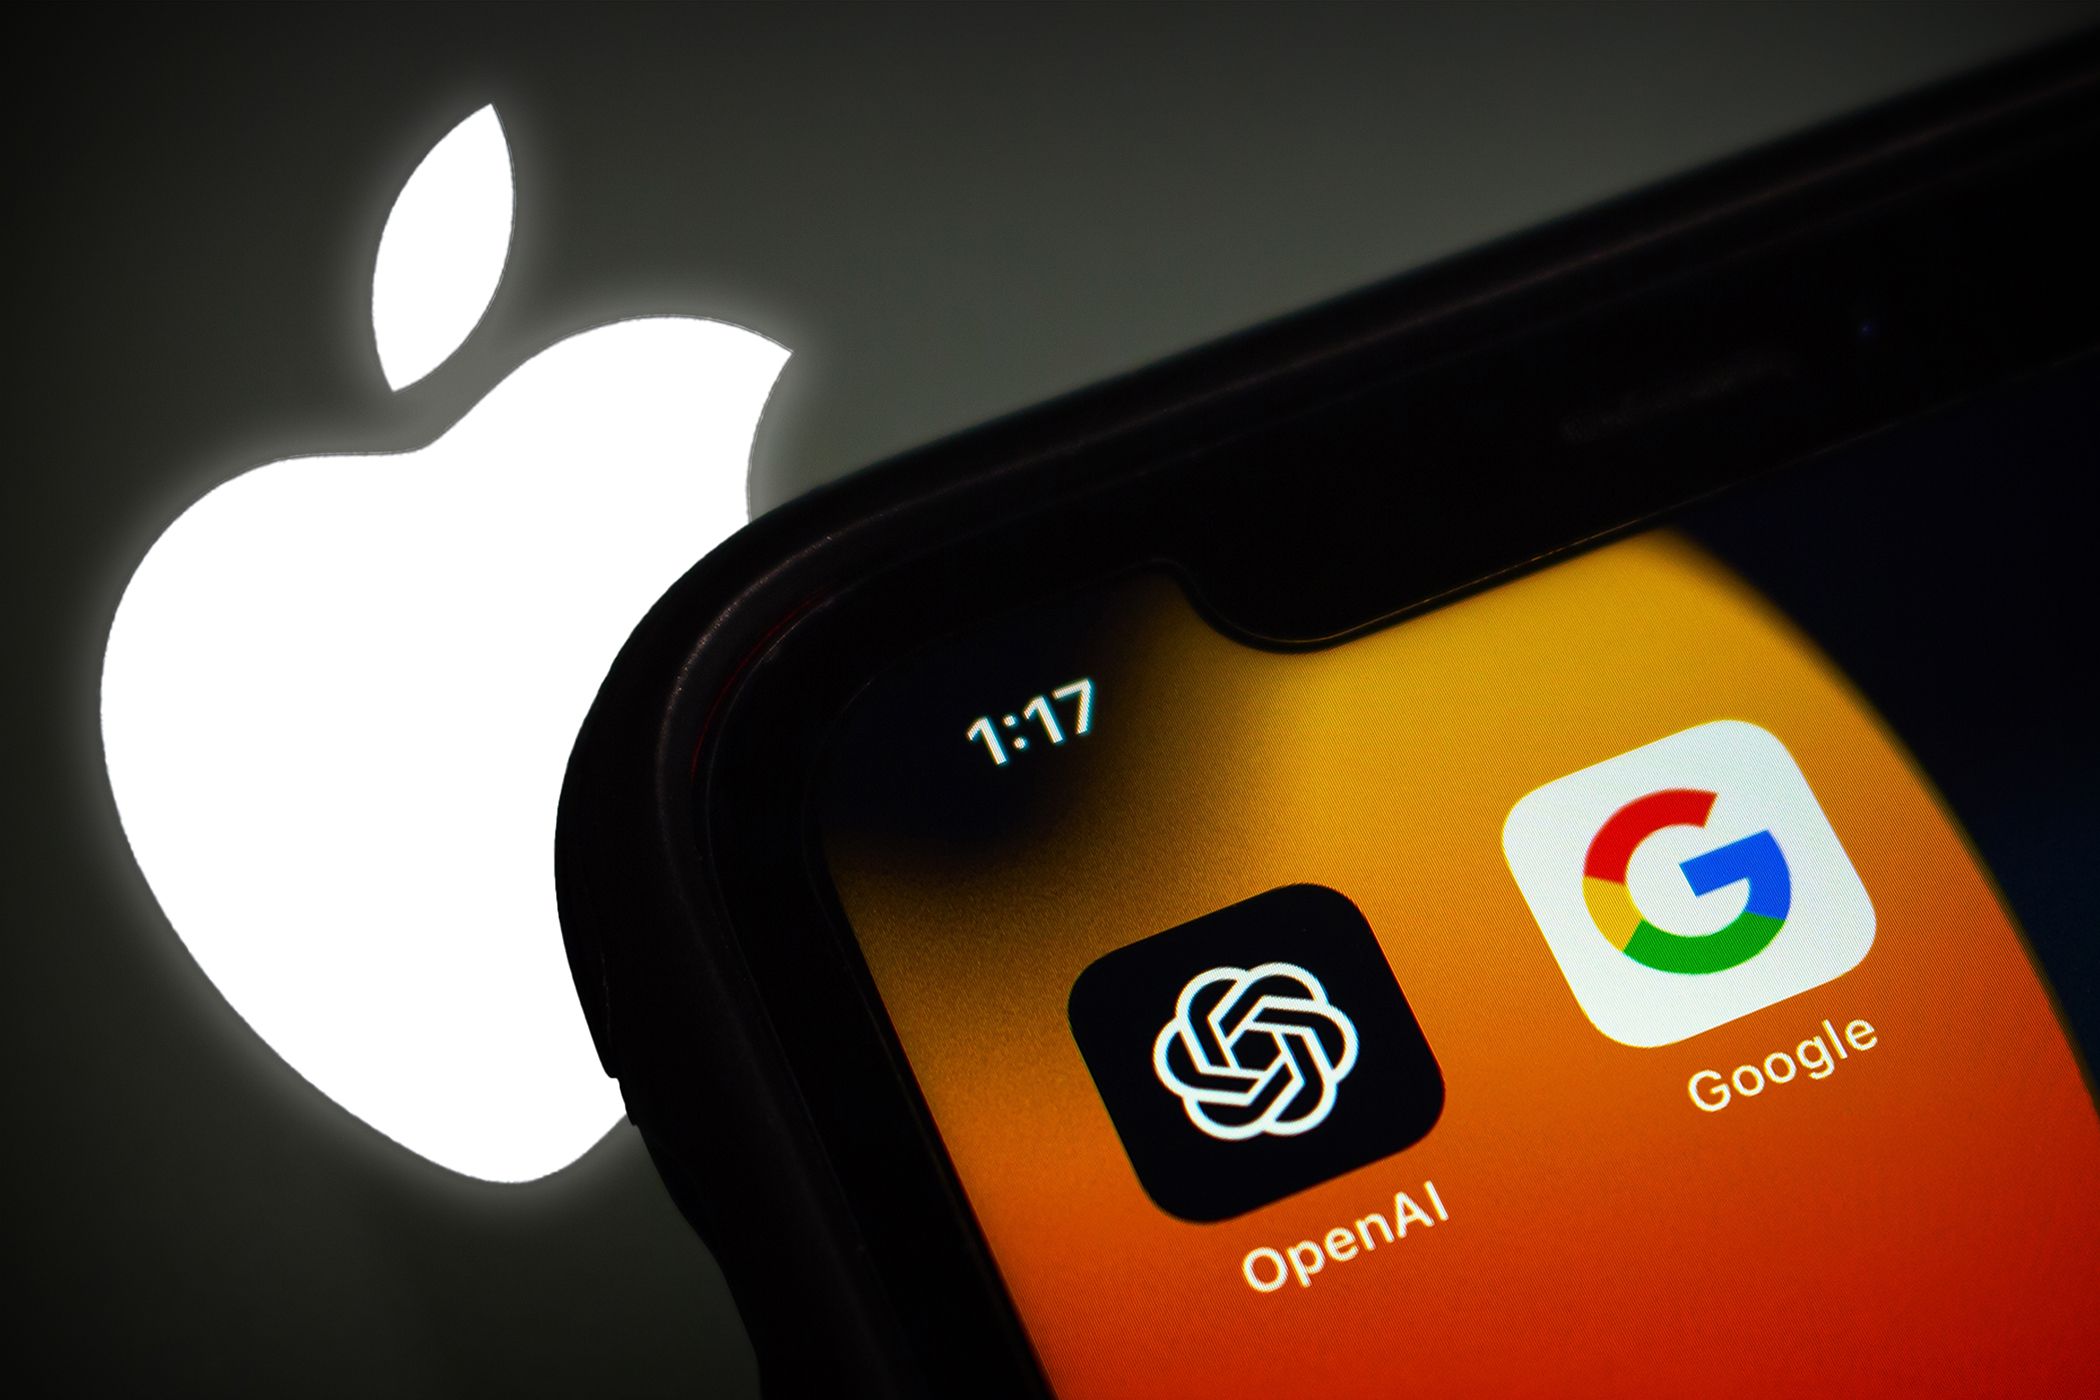 A close-up photo of an iPhone device revealing OpenAI and Google app icons